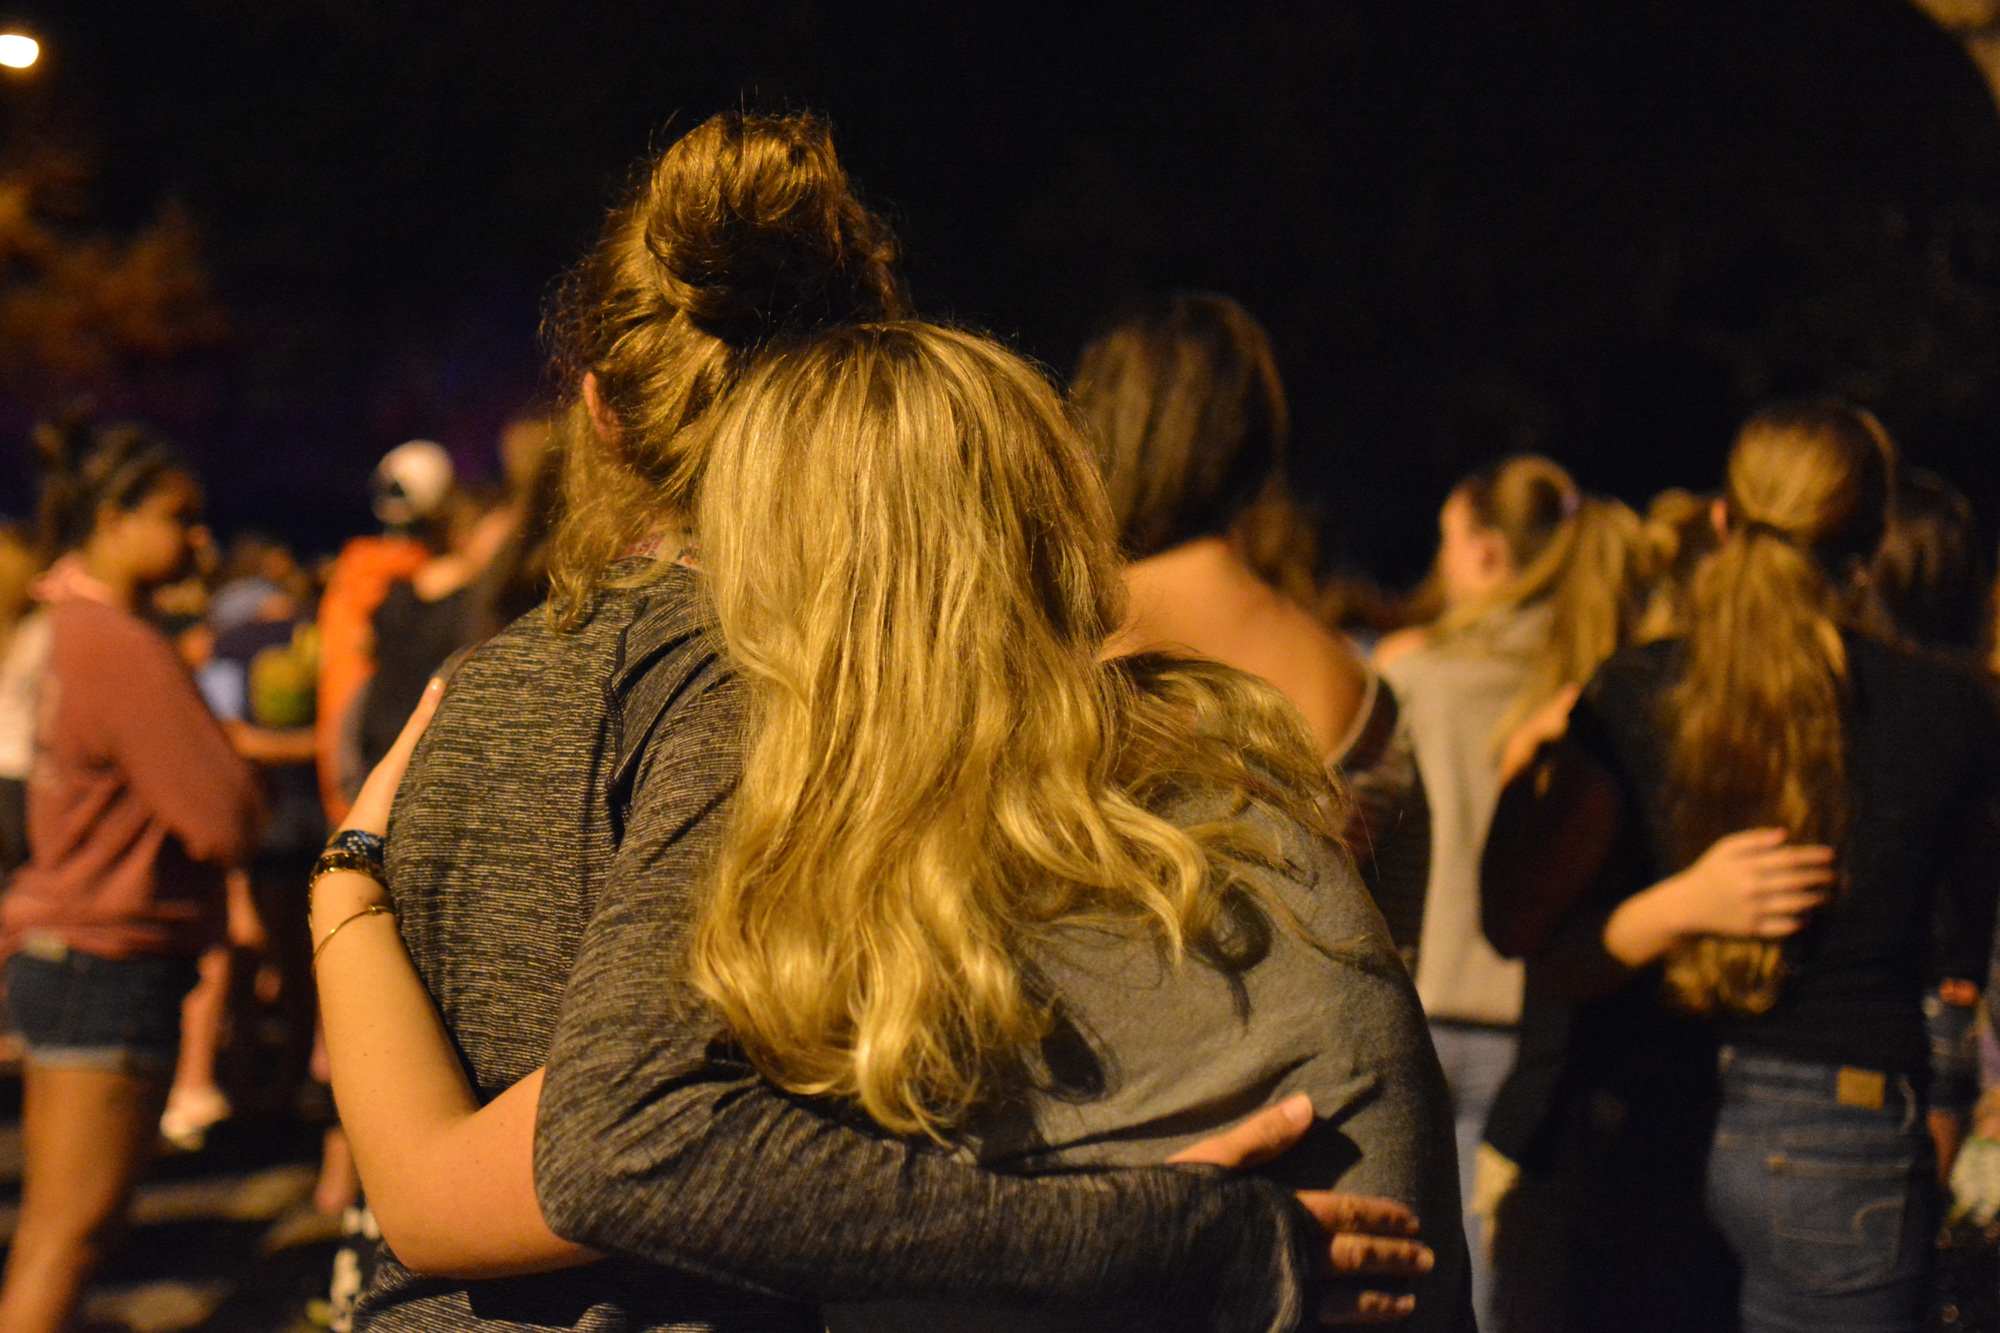 Lucy Milbourn and Ali Alger share an embrace as they stand at the candlelight vigil.